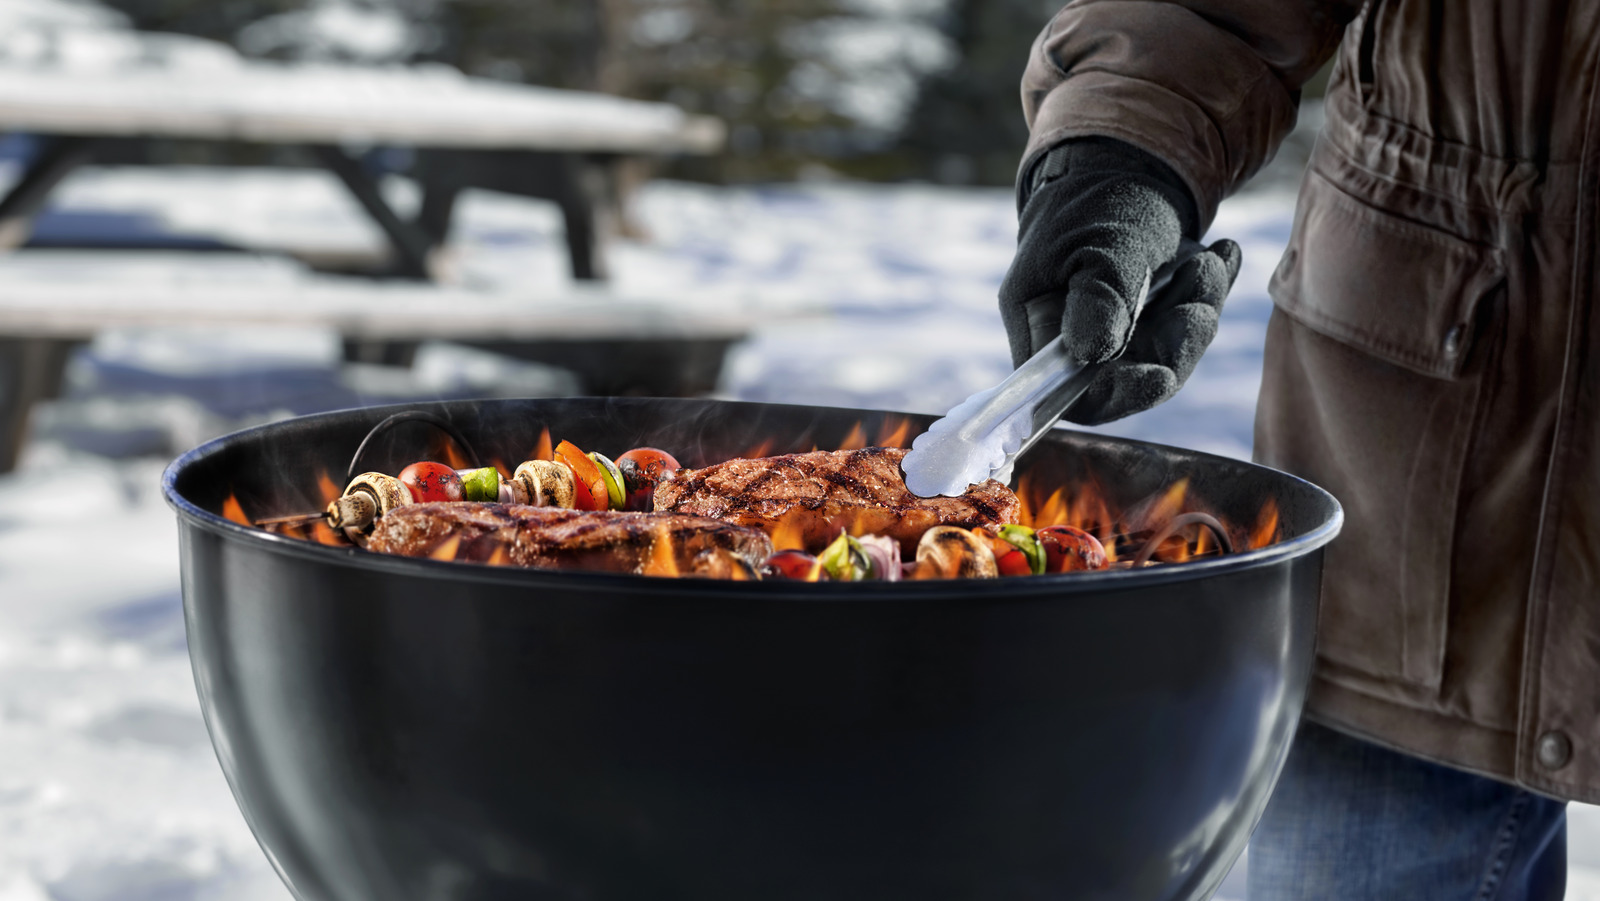 https://www.foodrepublic.com/img/gallery/5-things-you-need-to-know-before-grilling-in-cold-weather/l-intro-1701341893.jpg